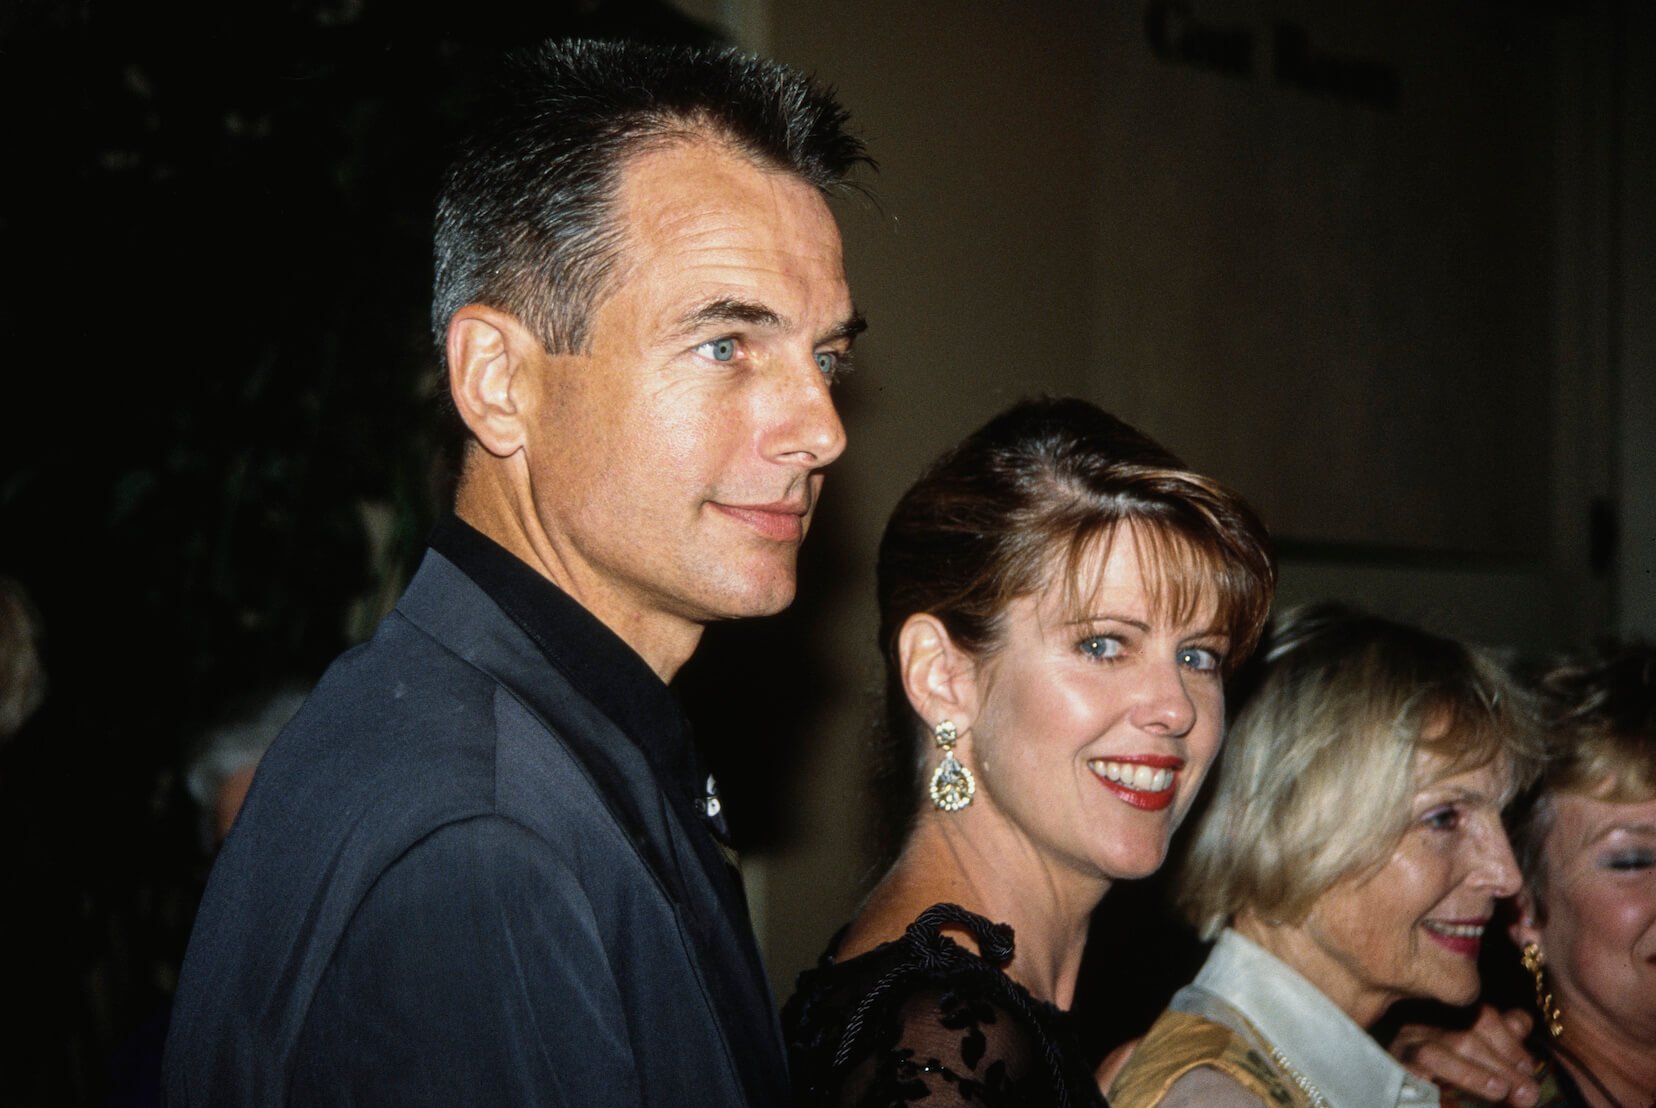 Mark Harmon and his wife, Pam Dawber, standing next to each other at an event. Dawber is looking over her shoulder at the camera. 